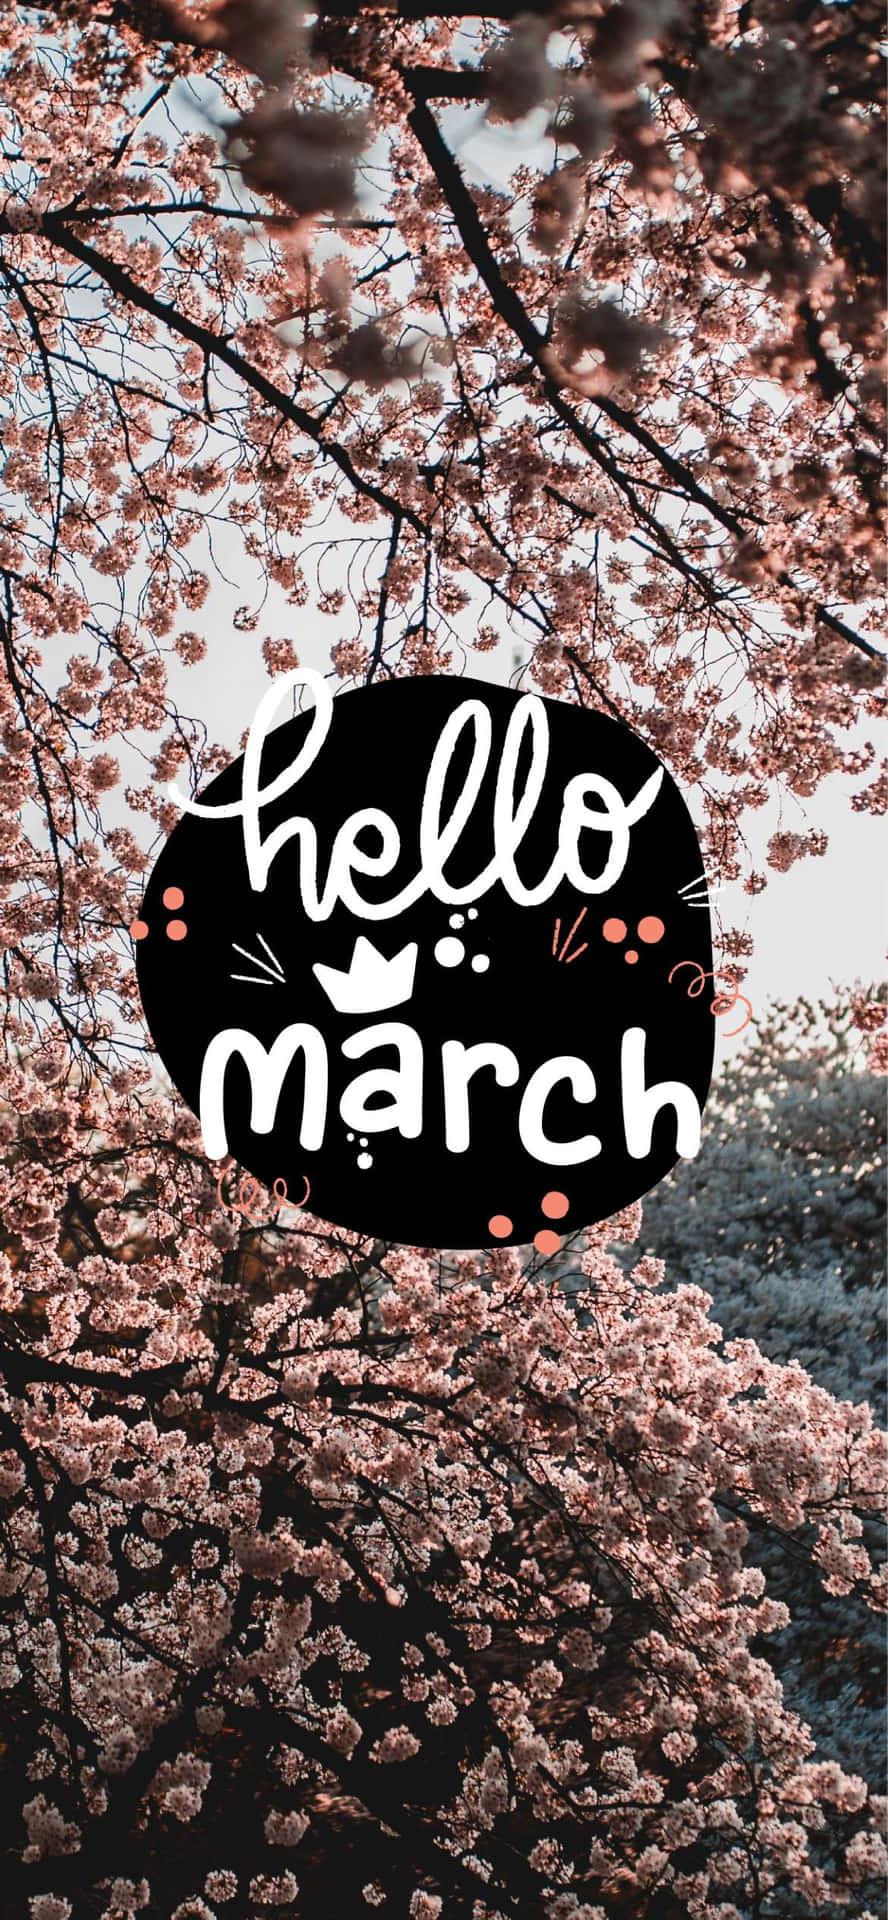 Wallpaper iPhonespringhello March   February wallpaper Hello march  Christmas collage